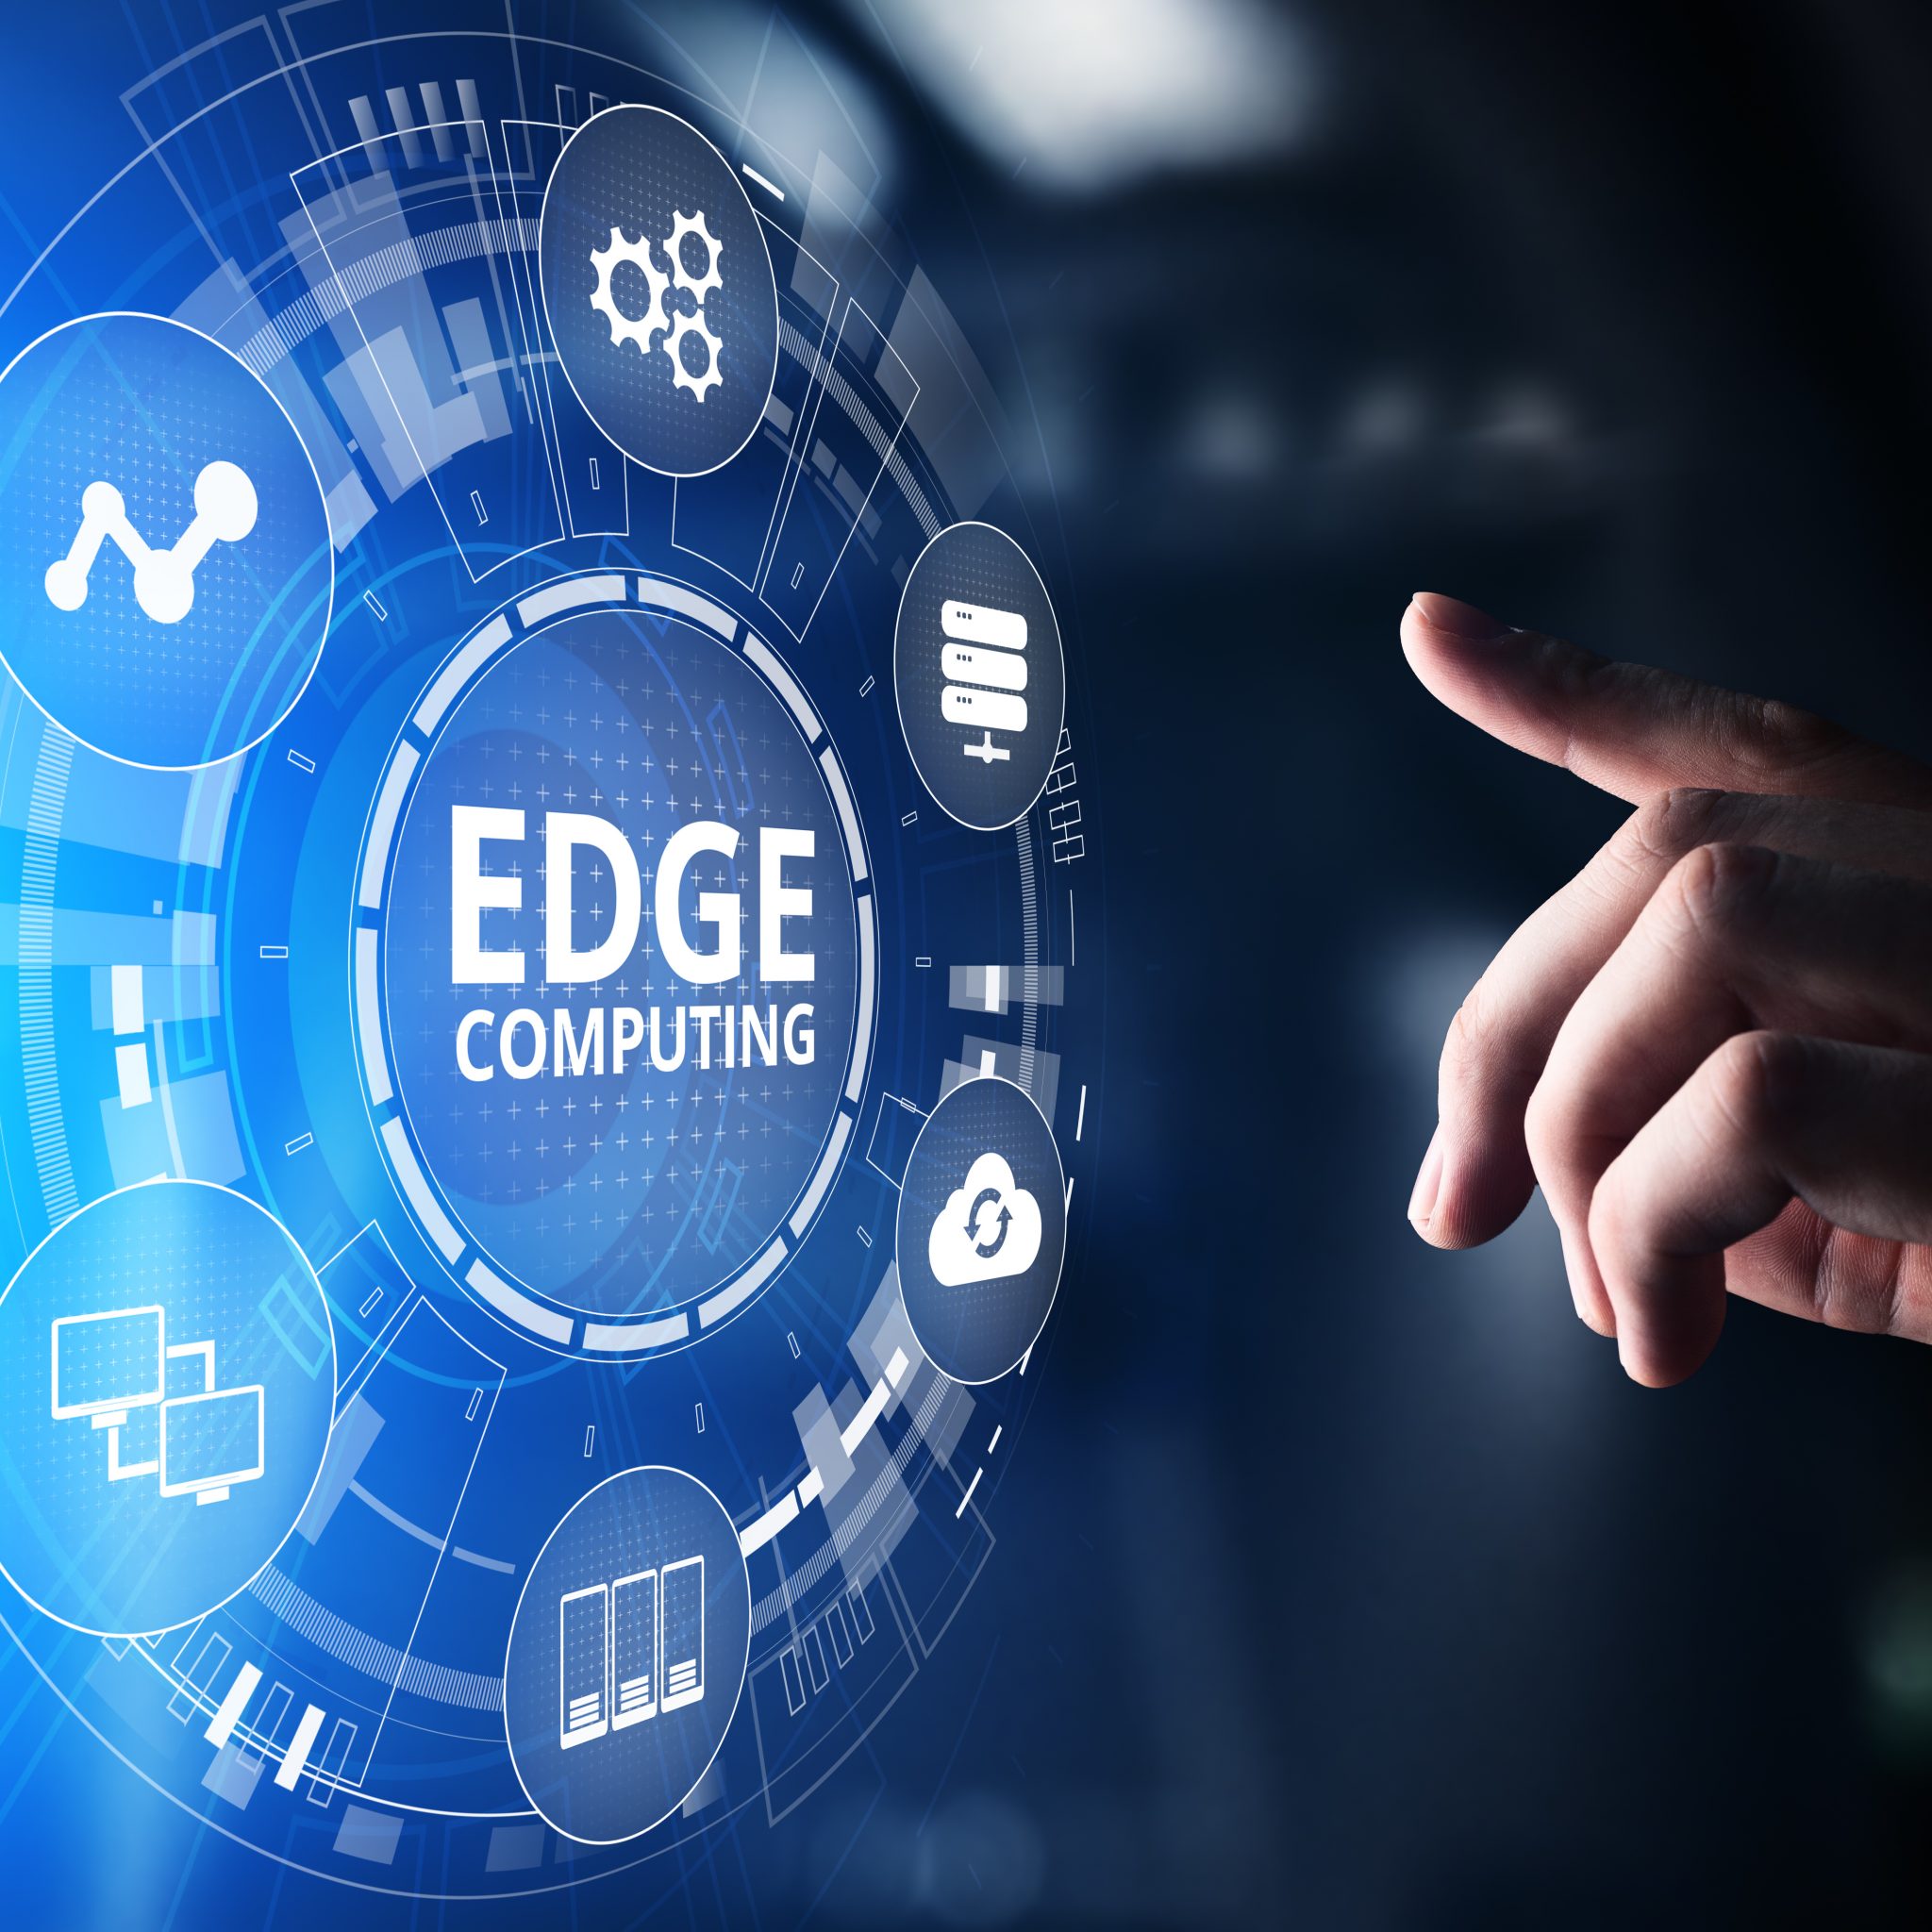 Top 5 mobile edge computing use cases